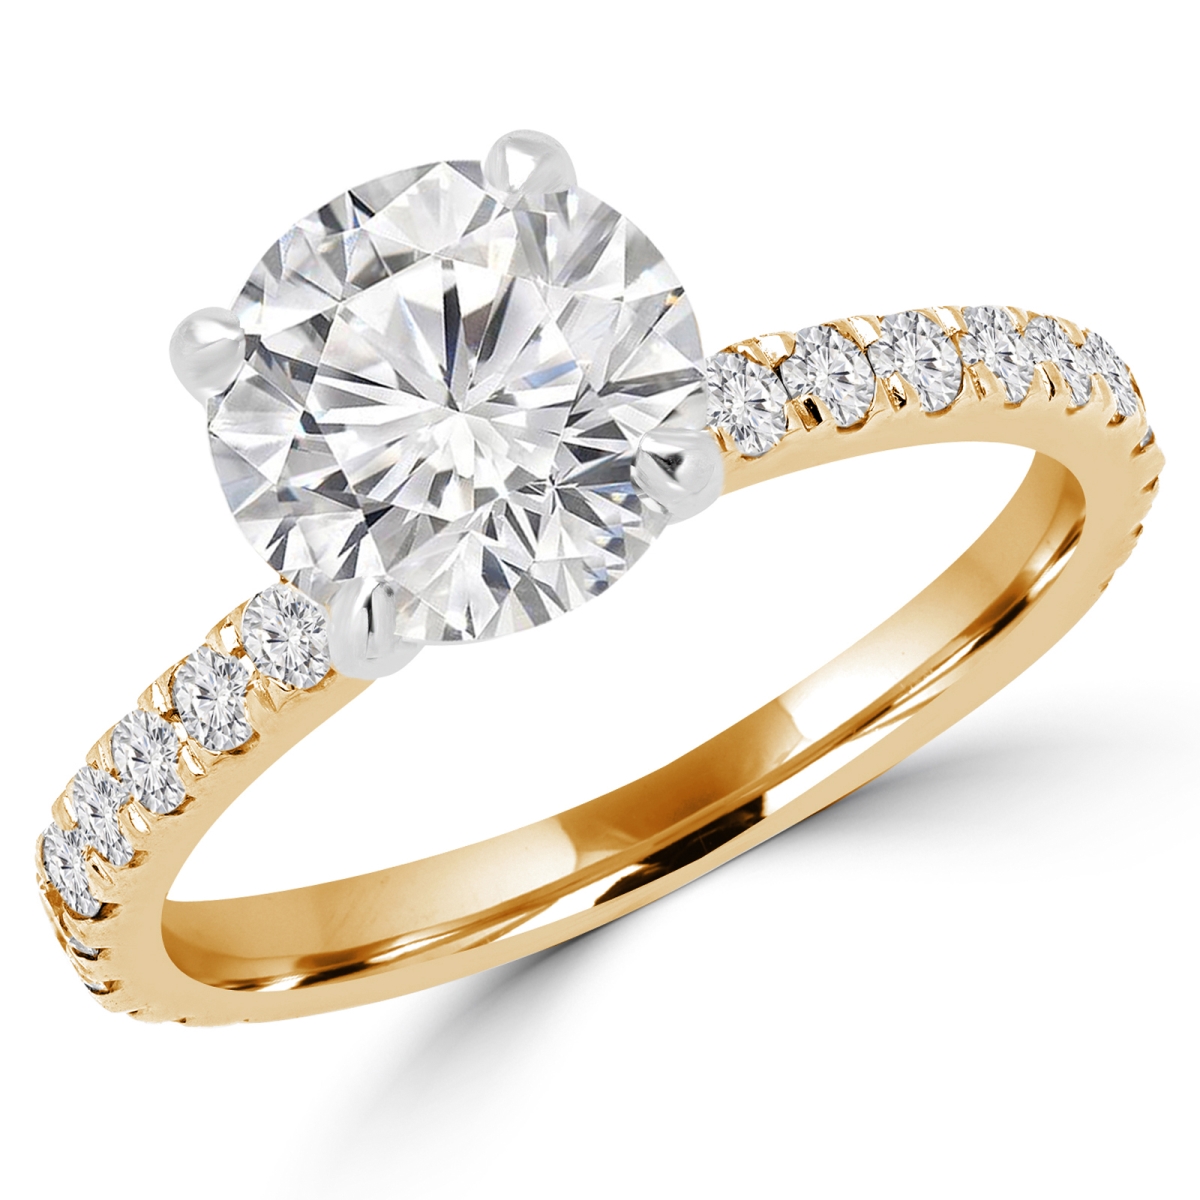 Picture of Majesty Diamonds MD160340-5.25 1 CTW Round Cut Diamond Multi Stone Engagement Ring in 14K Yellow Gold - Size 5.25